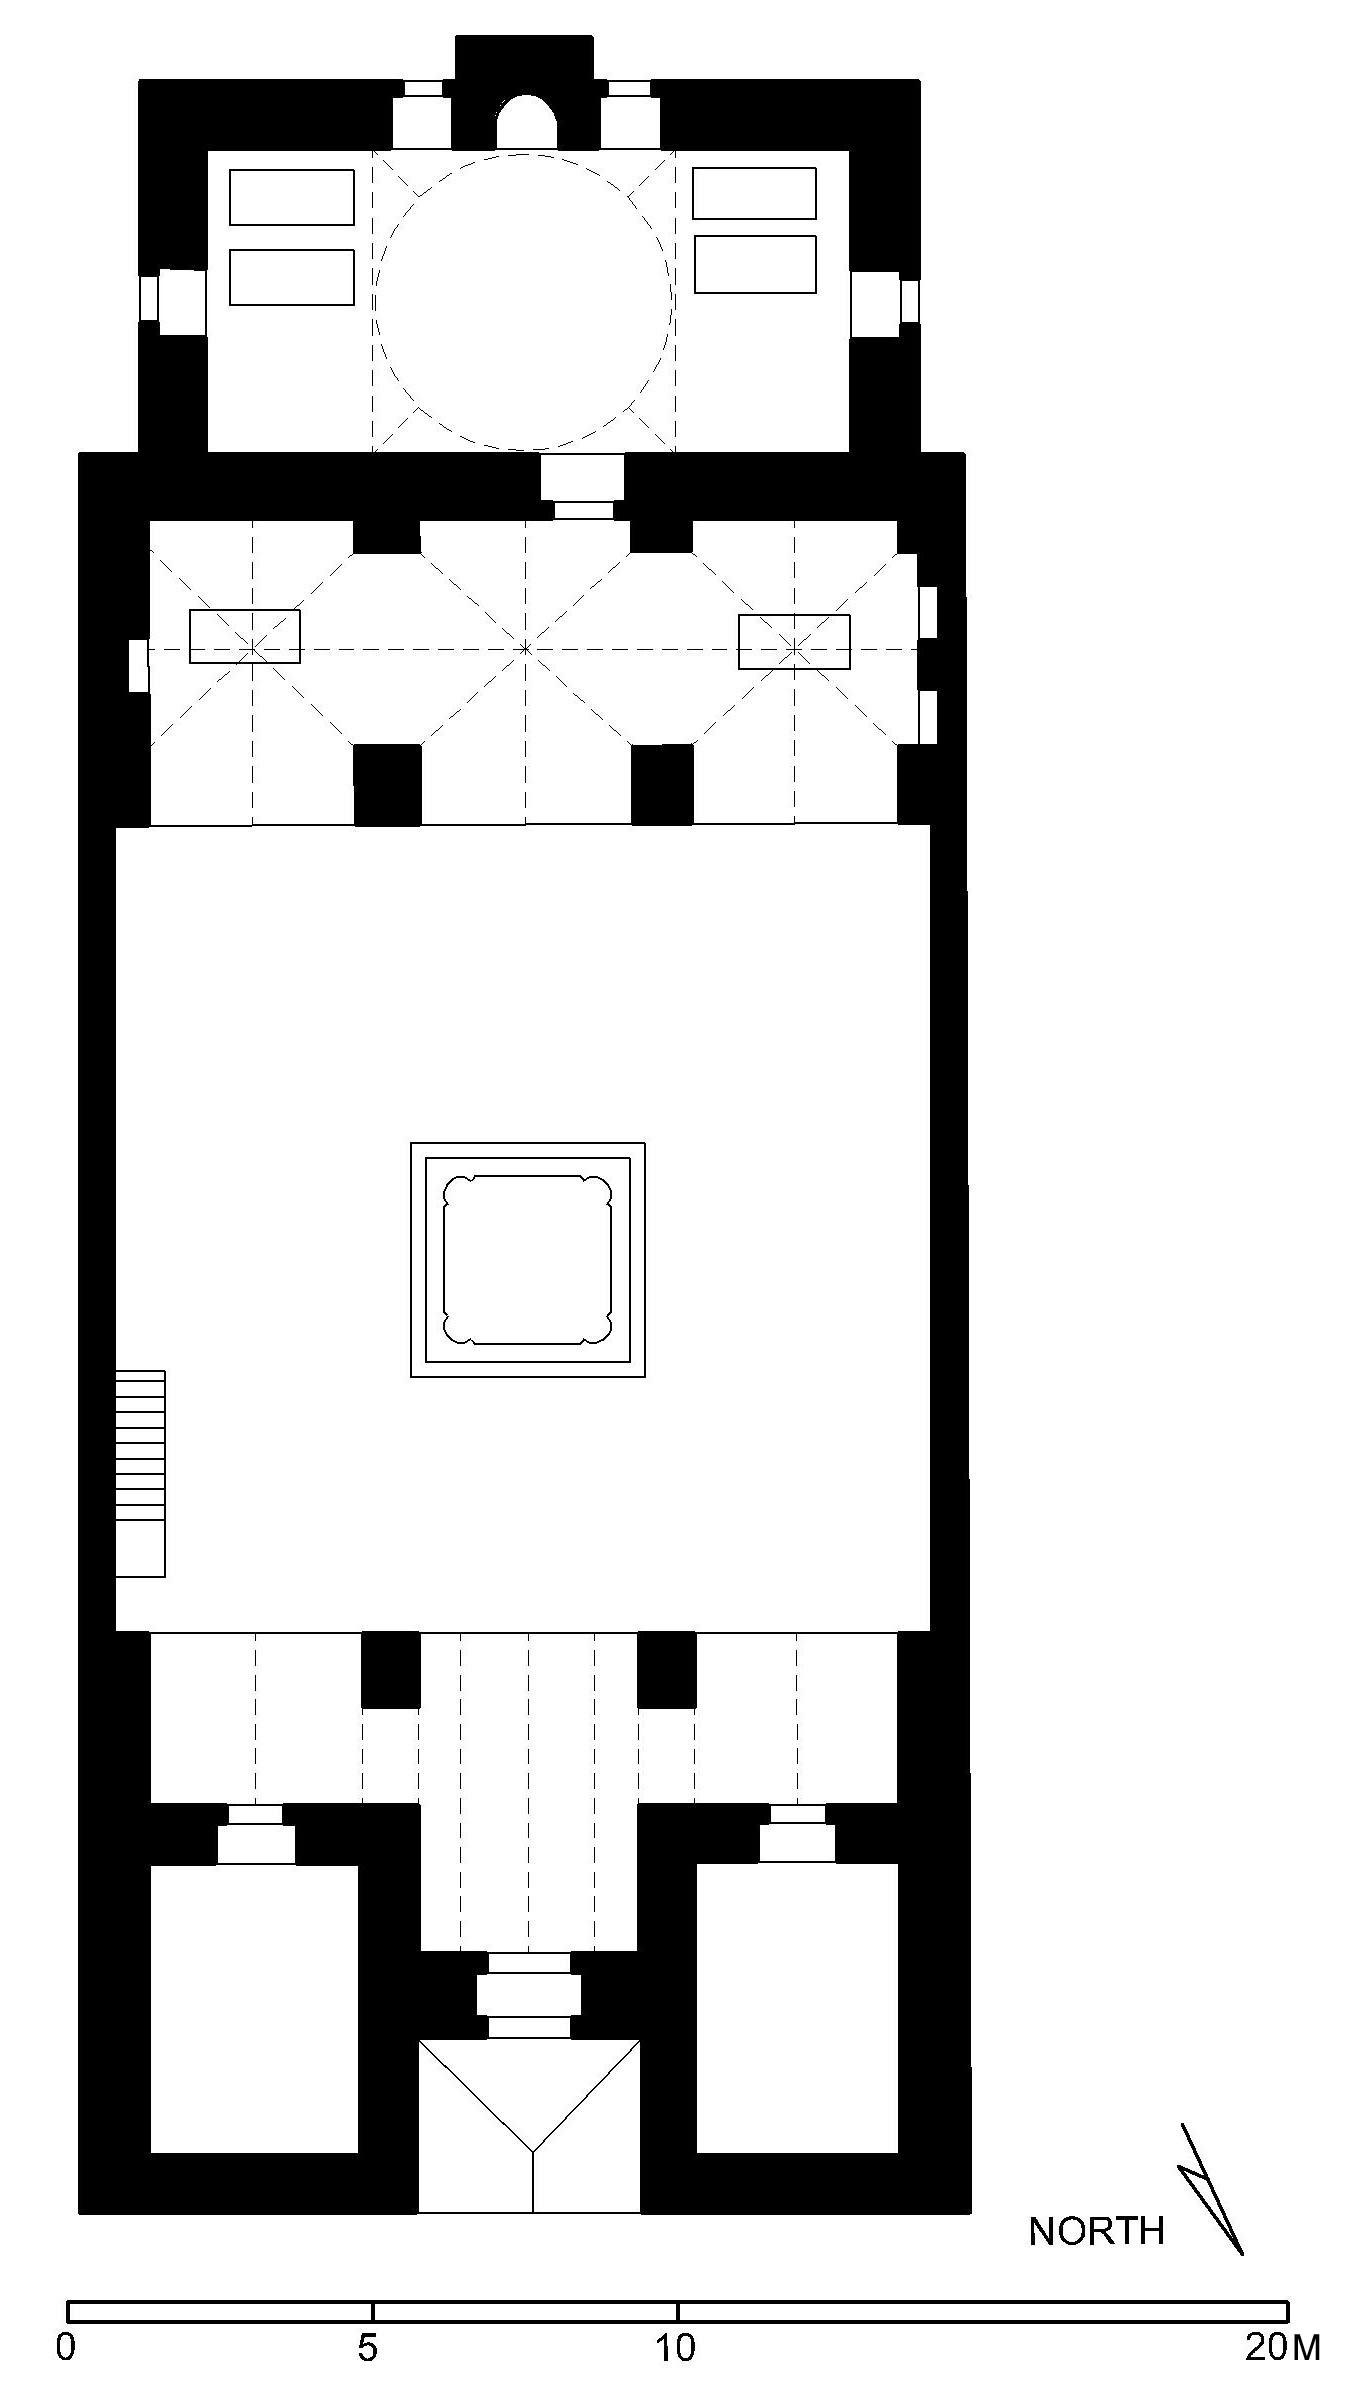 Ribat Qarasungur - Floor plan of the ribat (after Meinecke) in AutoCAD 2000 format. Click the download button to download a zipped file containing the .dwg file.